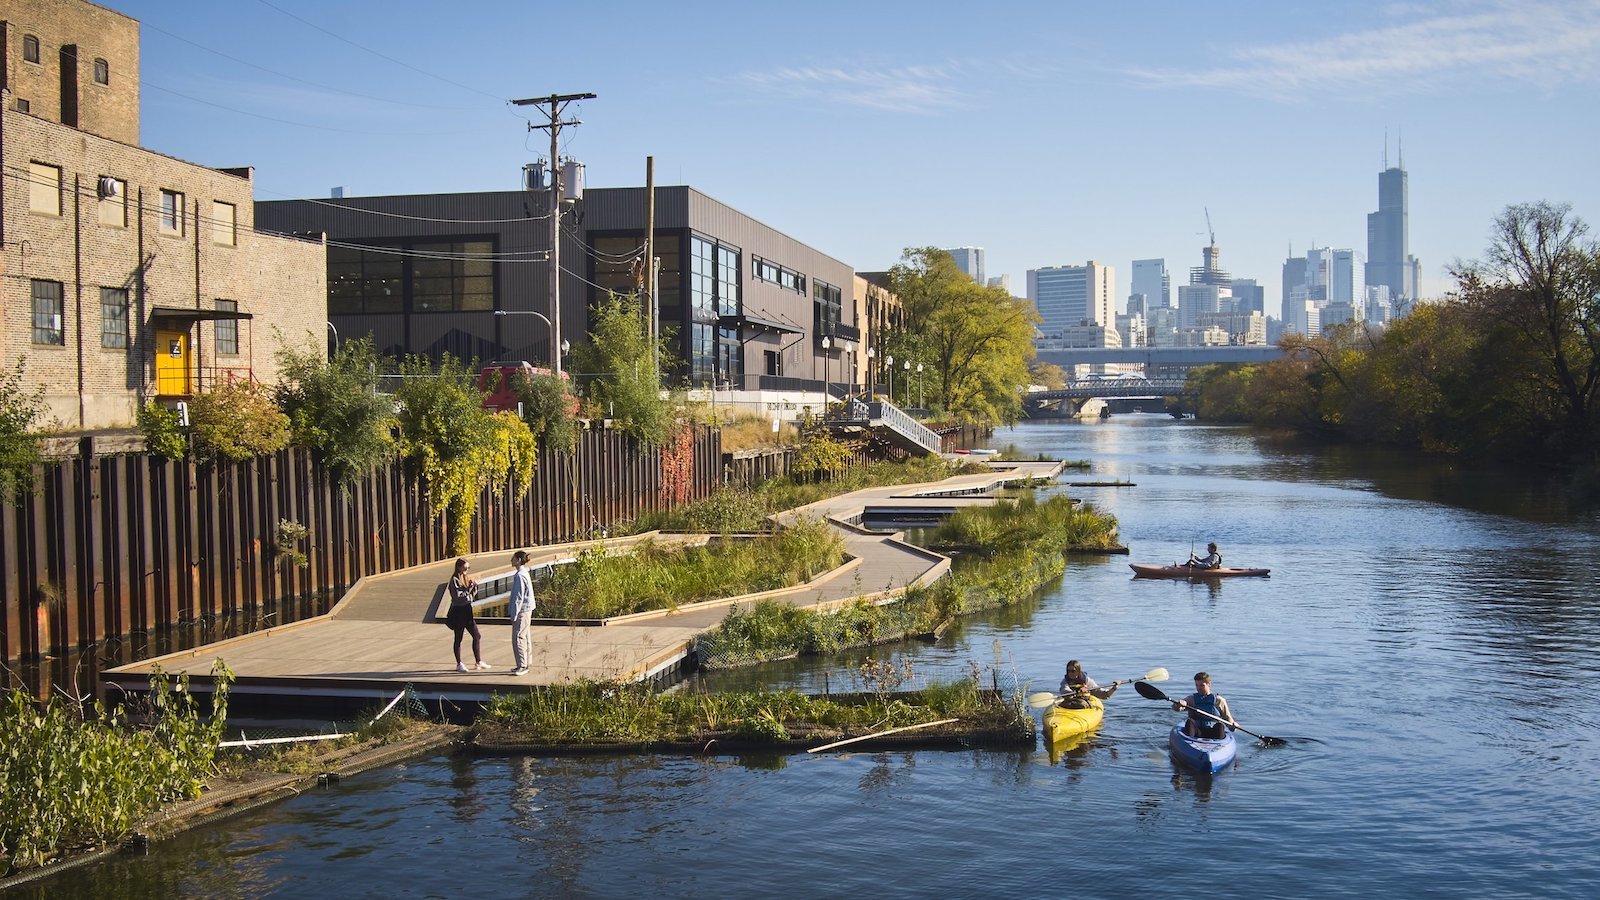 How Floating Wetlands Are Helping to Clean Up Urban Waters - Yale Environment 360